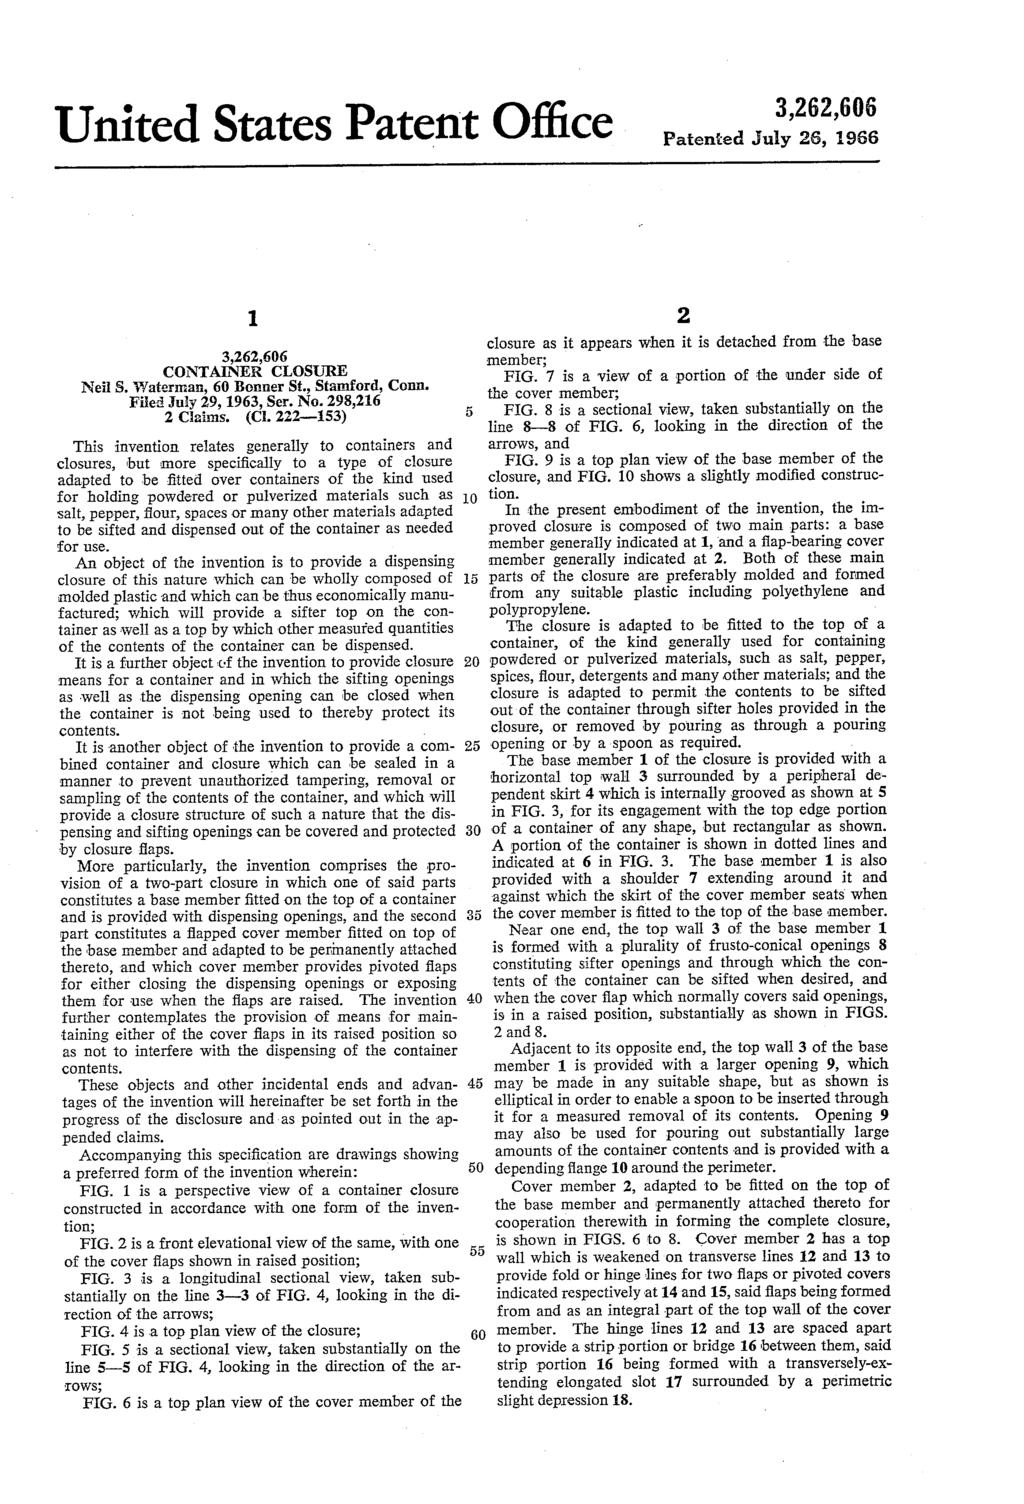 United States Patent Office Patented July 26, 1966 Neil S. Waterman, 60 Bonner St., Stamford, Conn. Filed July 29, 1963, Ser. No. 298,216 2 Claims. (C.